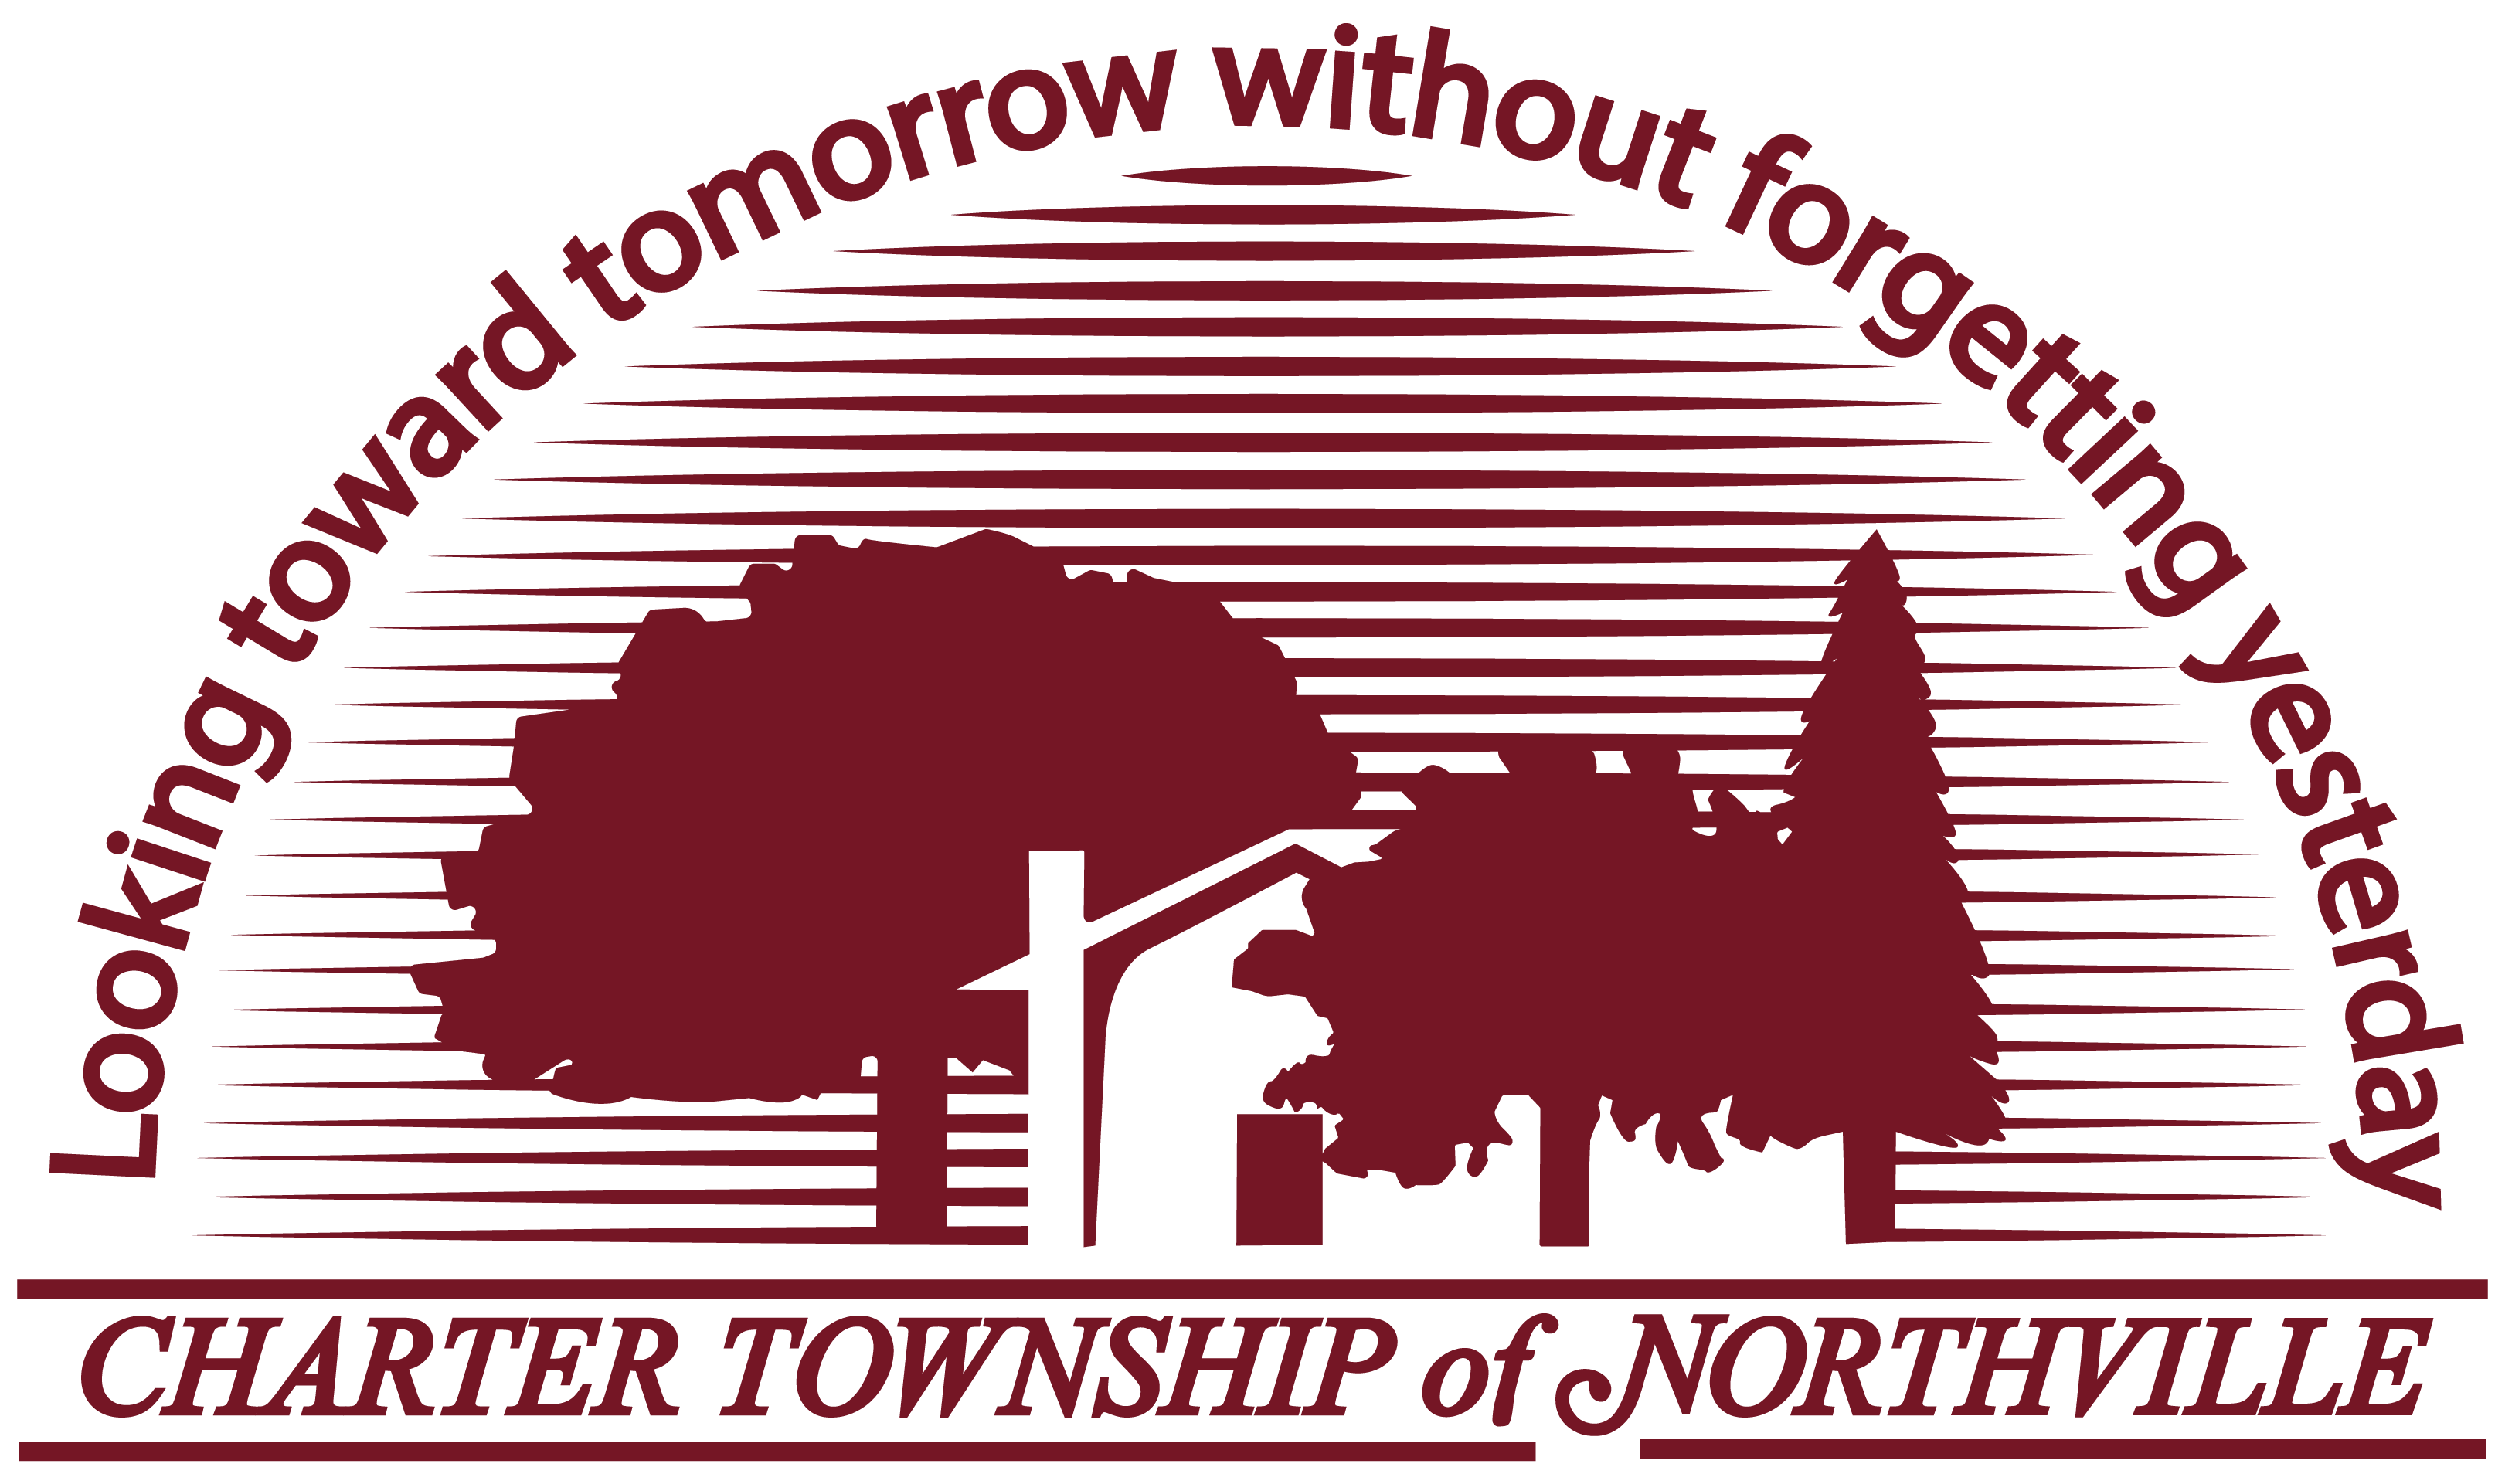 The Charter Township of Northville Profile